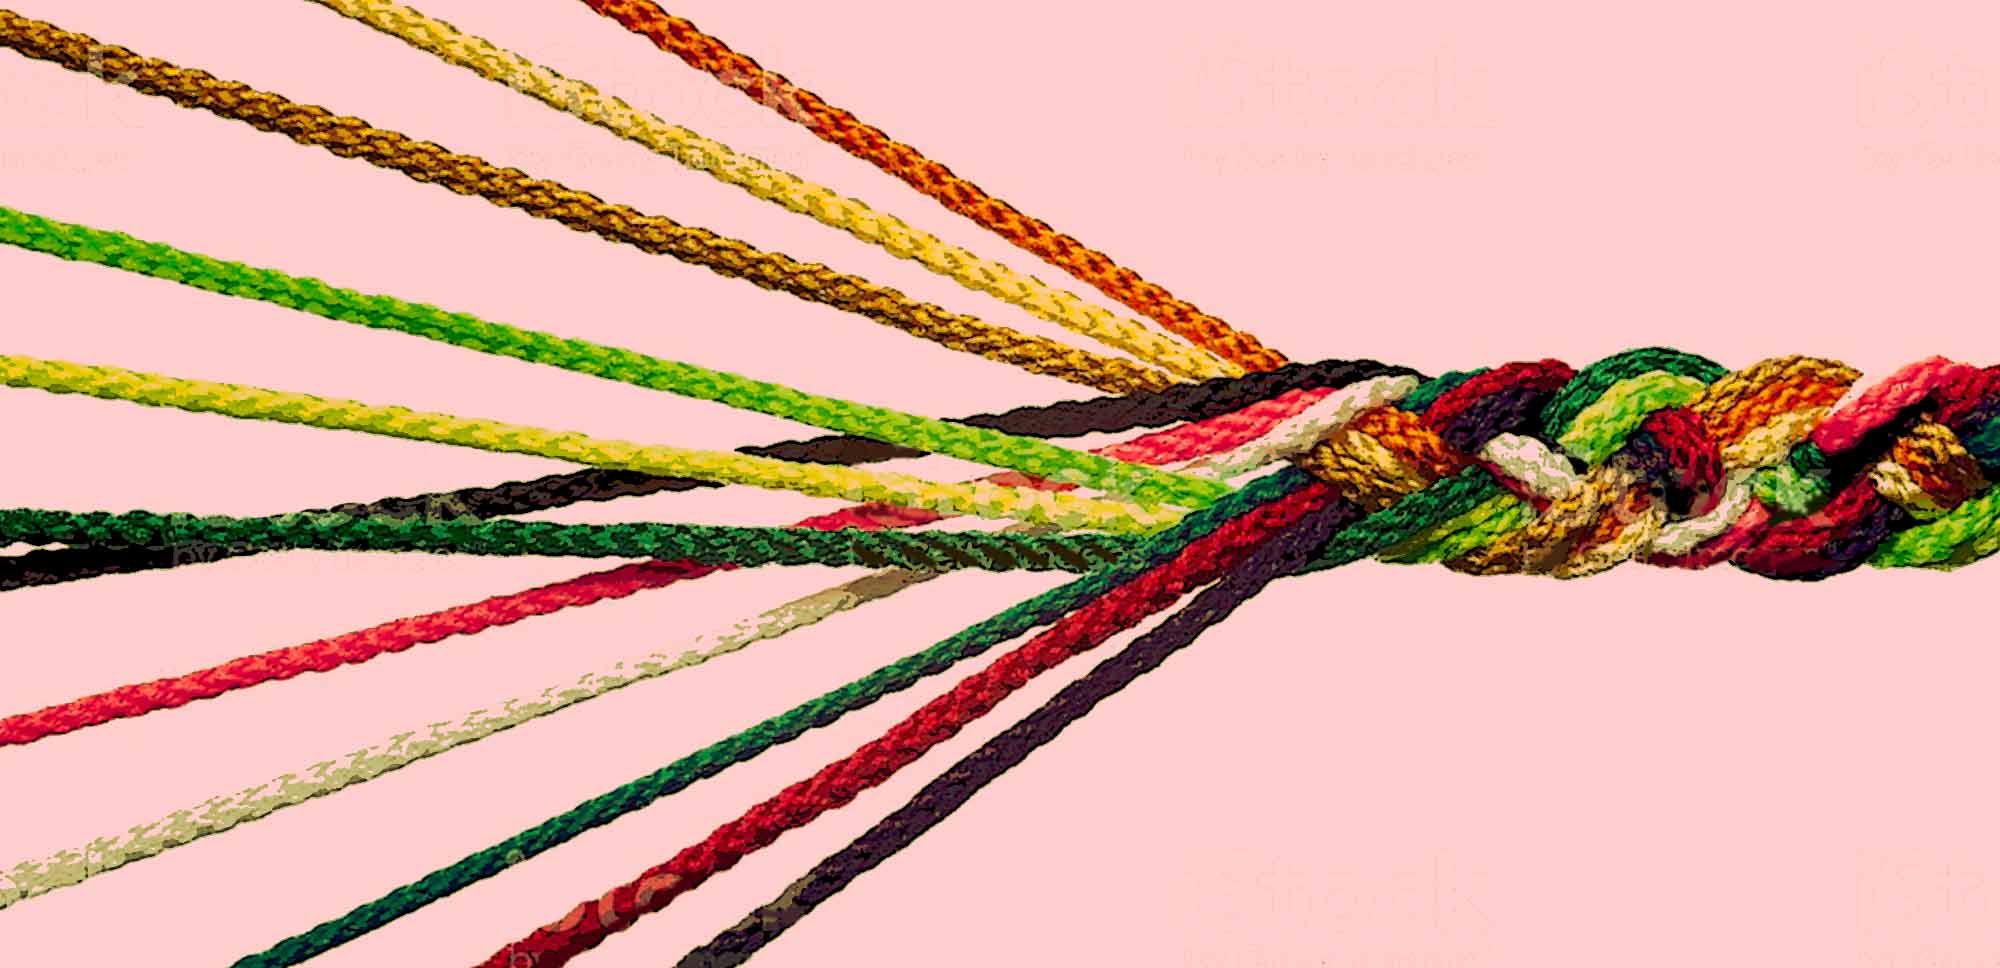 colored strings representing productivity